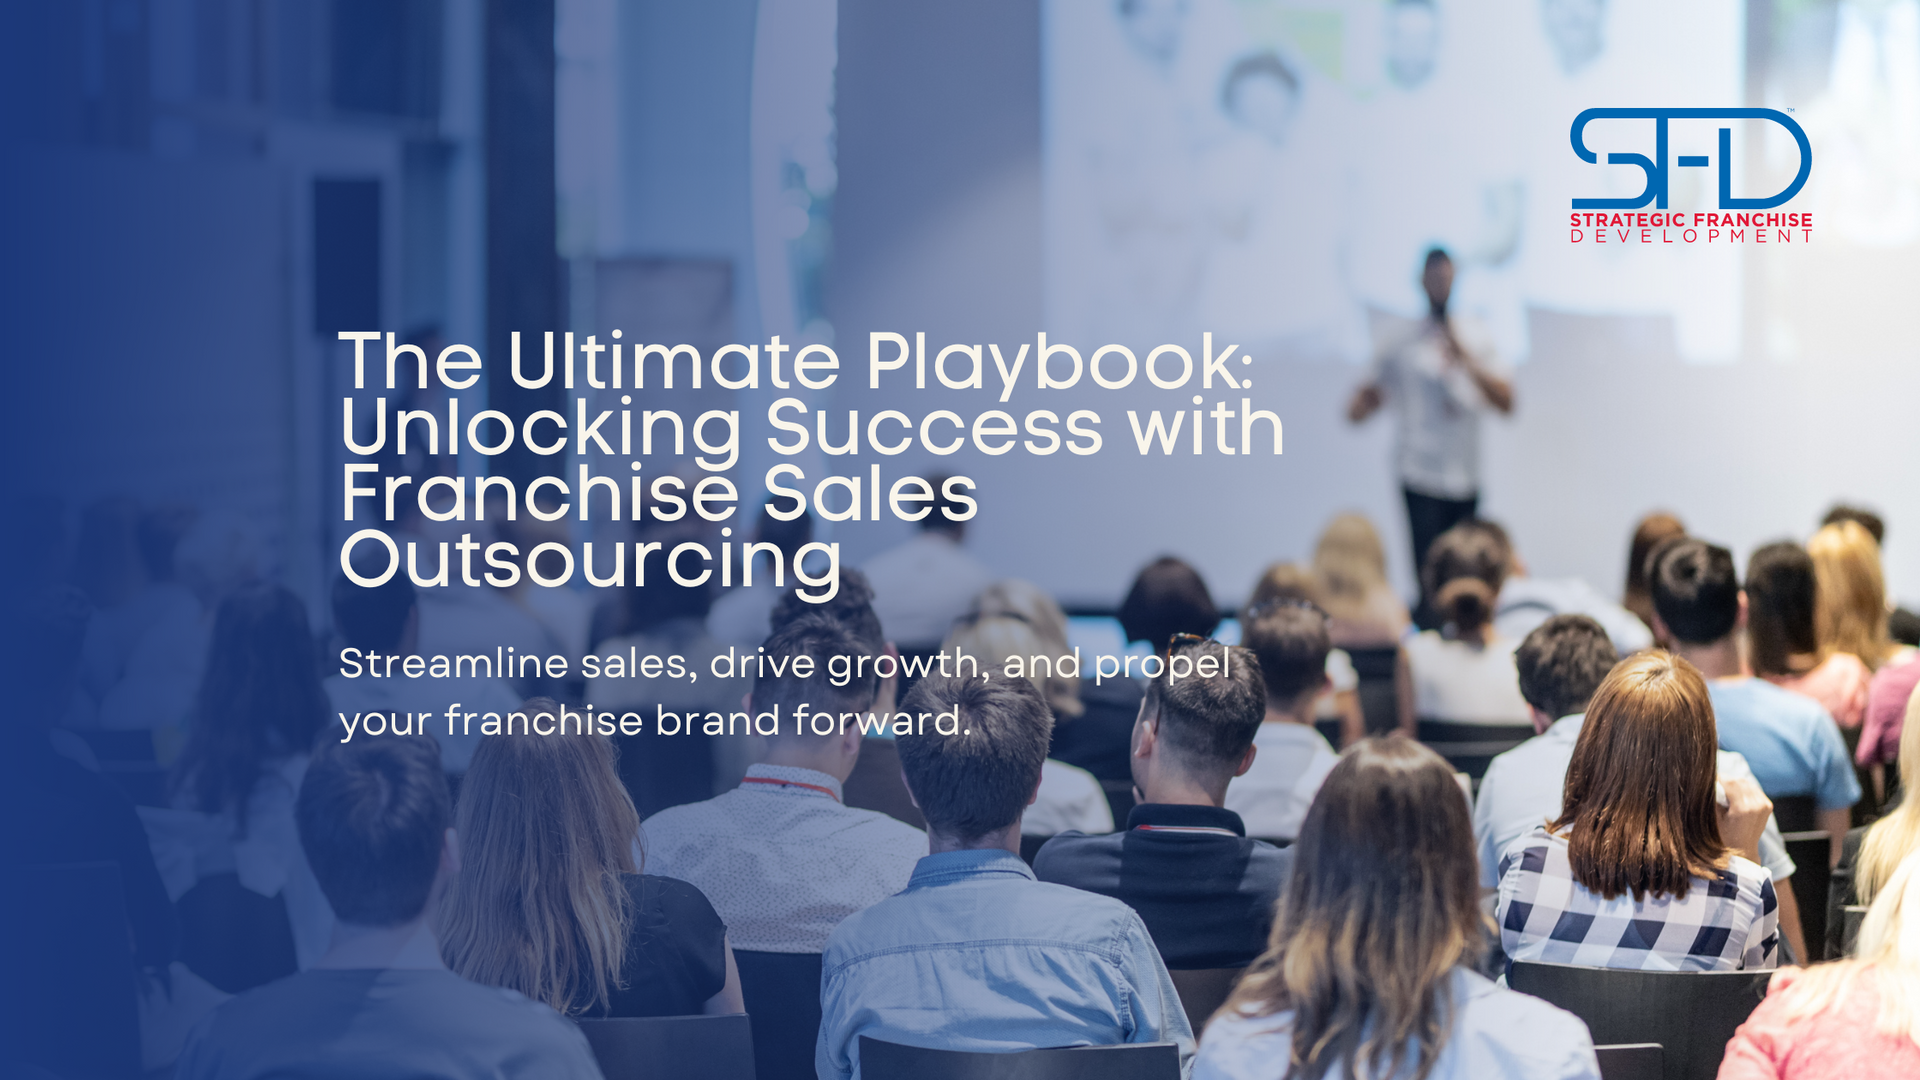 franchise sales outsourcing playbook